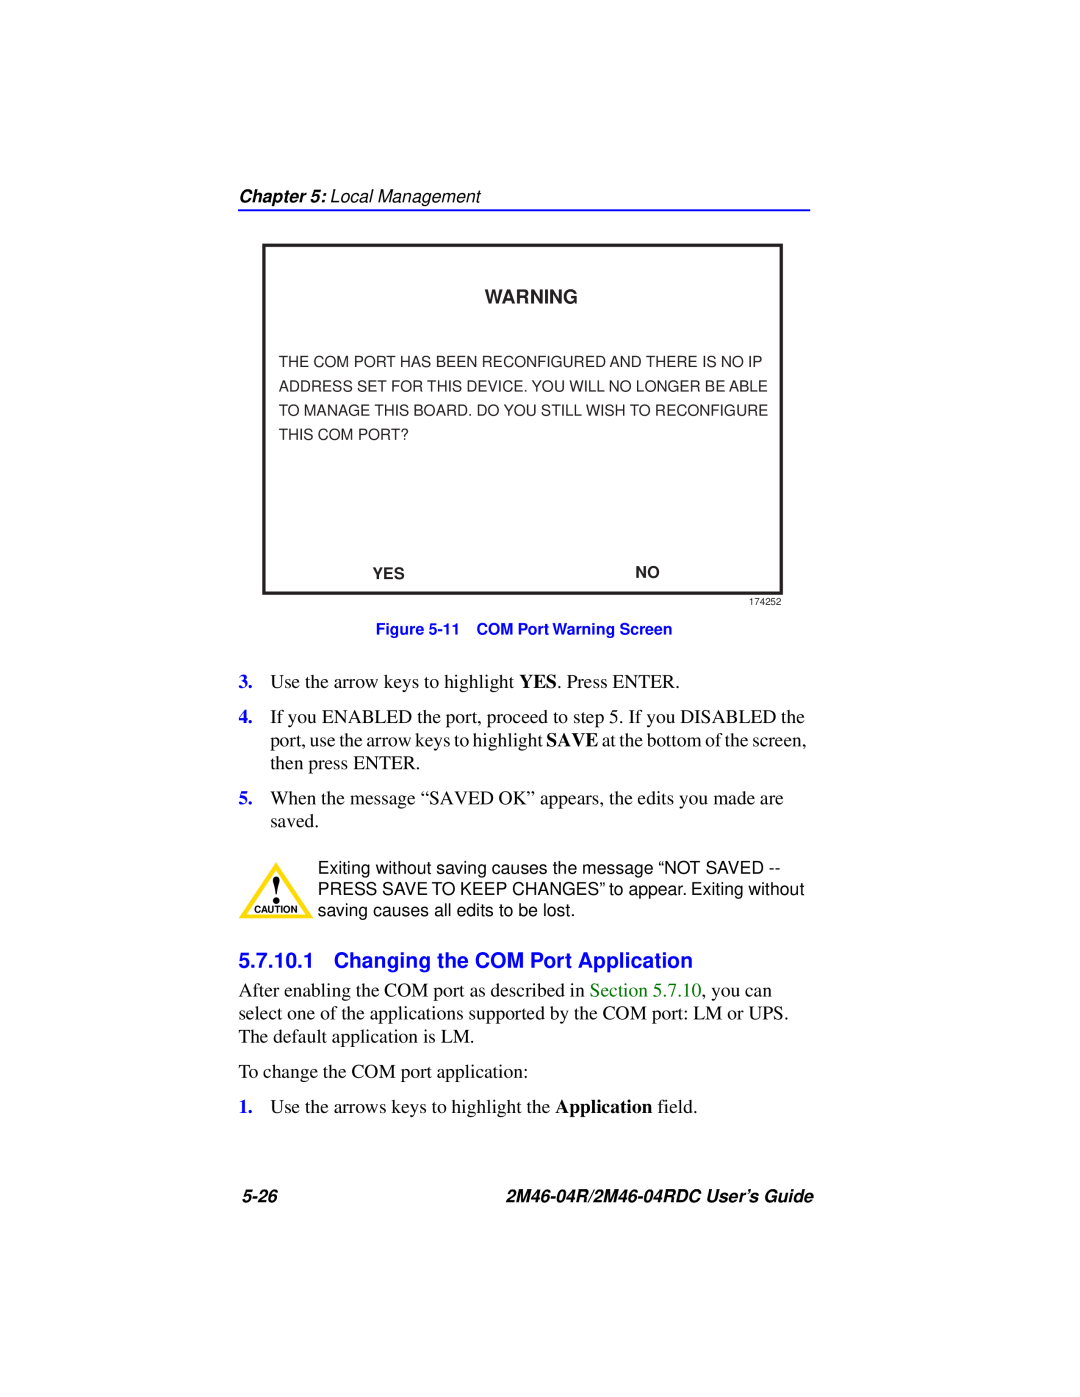 Cabletron Systems pmn manual Changing the COM Port Application 